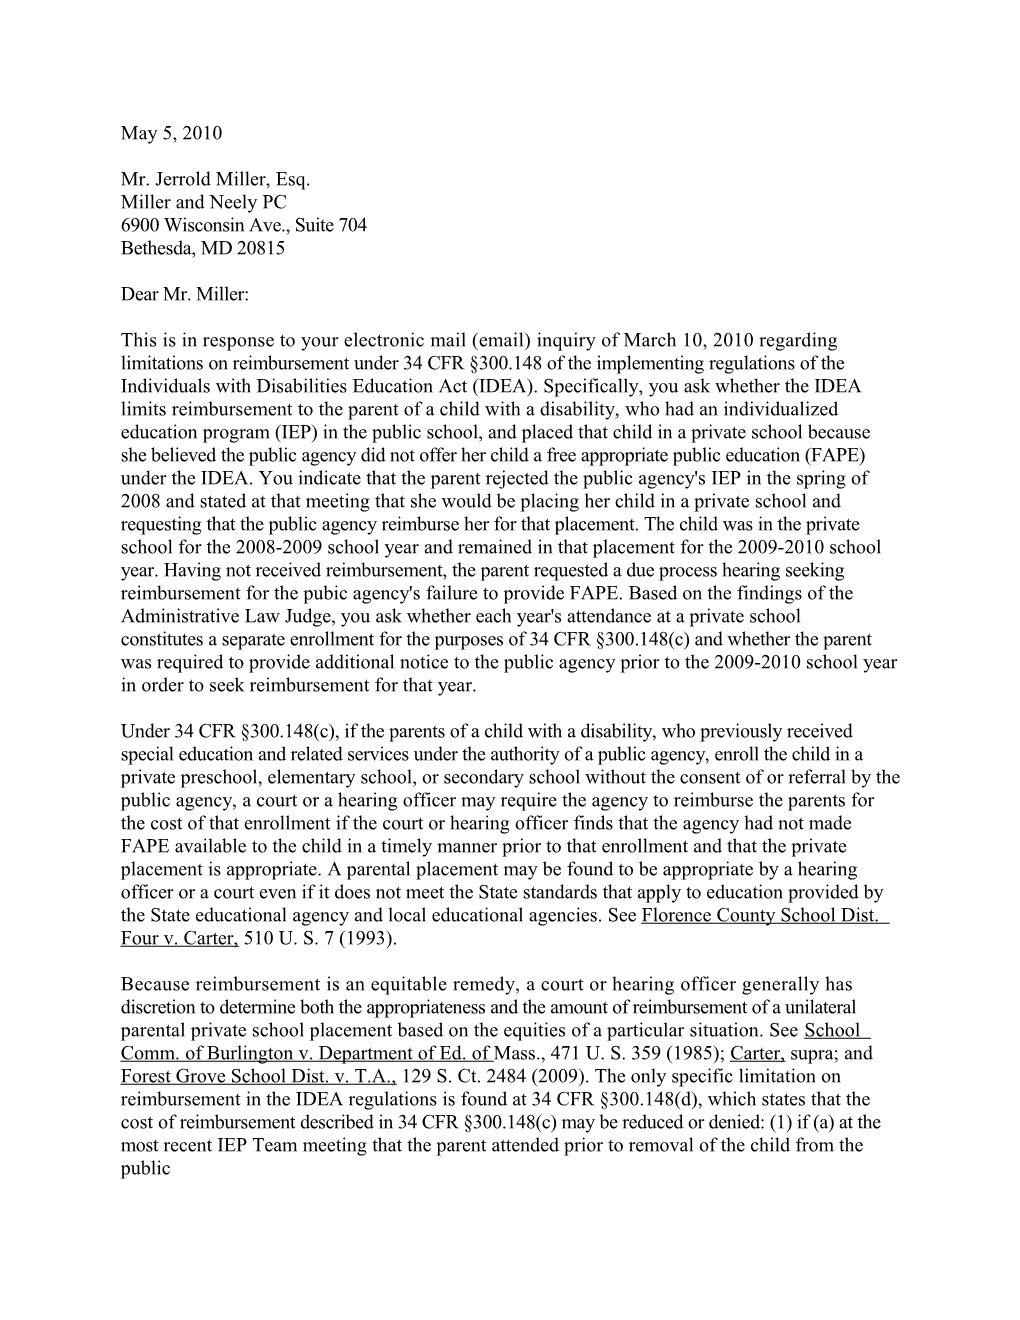 Miller Letter Dated 05/05/10 Re: Children in Private Schools (MS Word)